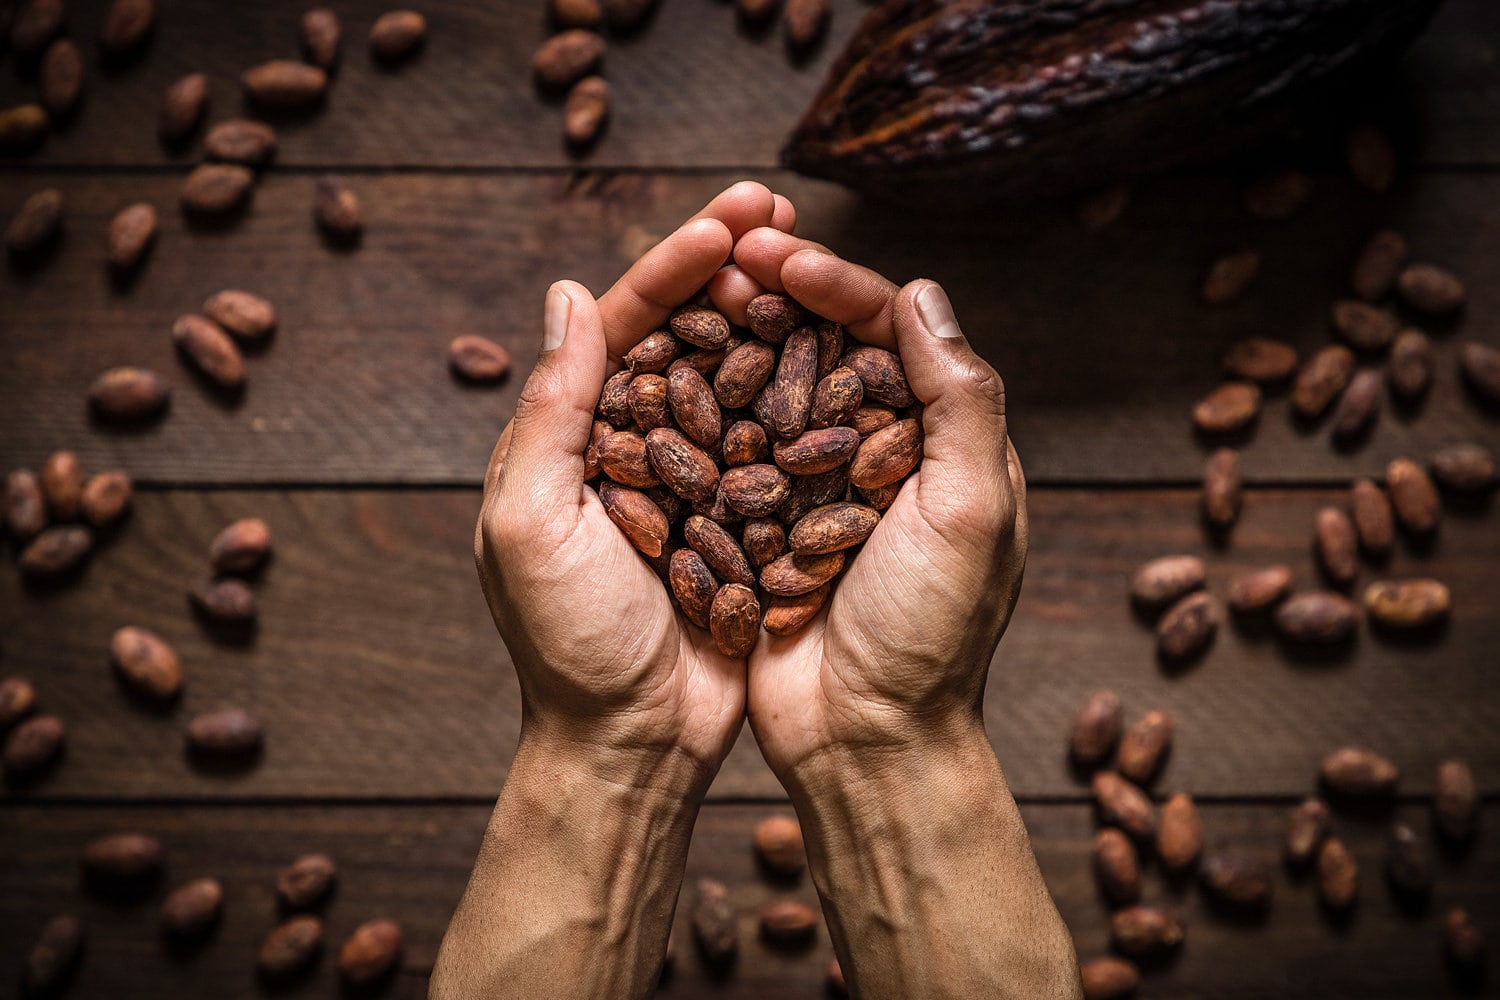 Human hands holding cocoa beans